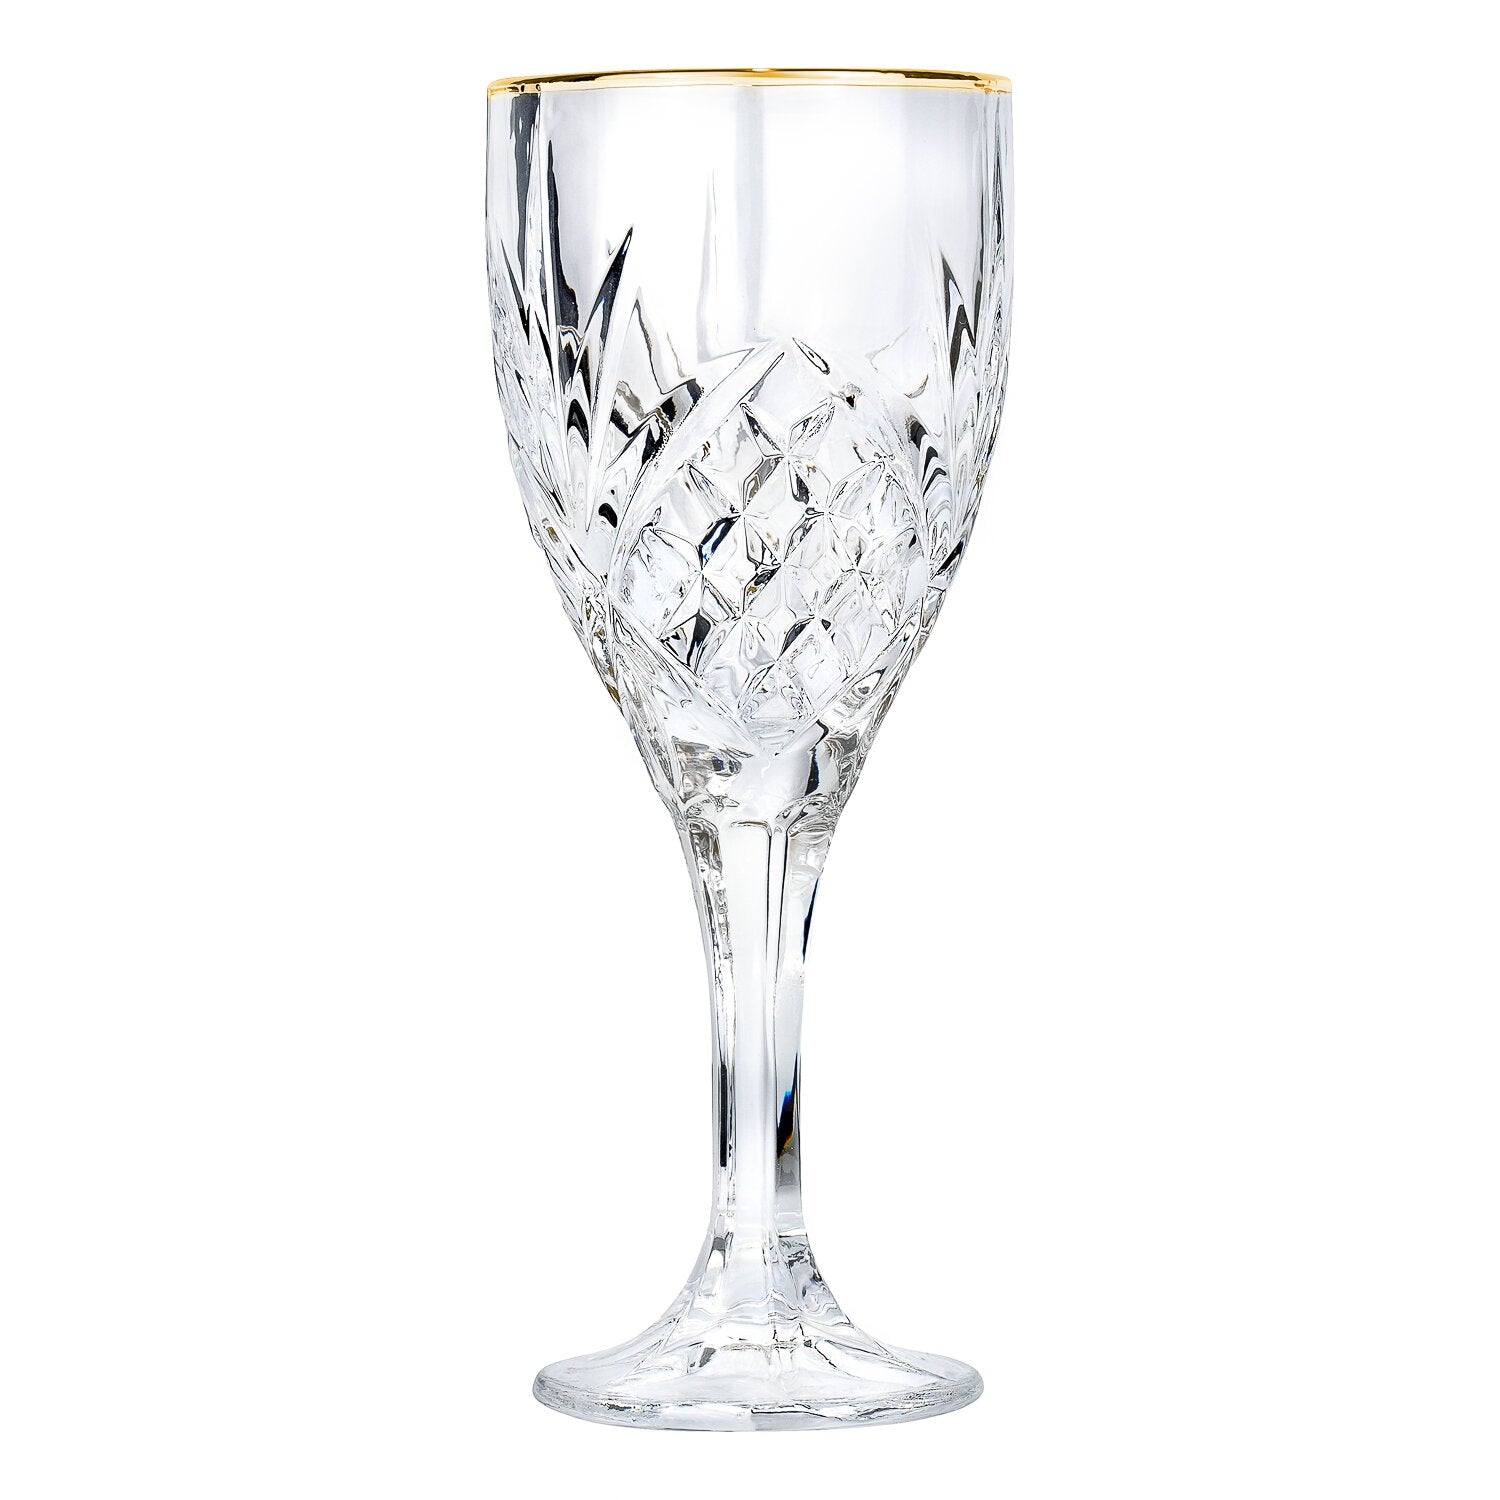 Find more Brass Wine Glasses for sale at up to 90% off